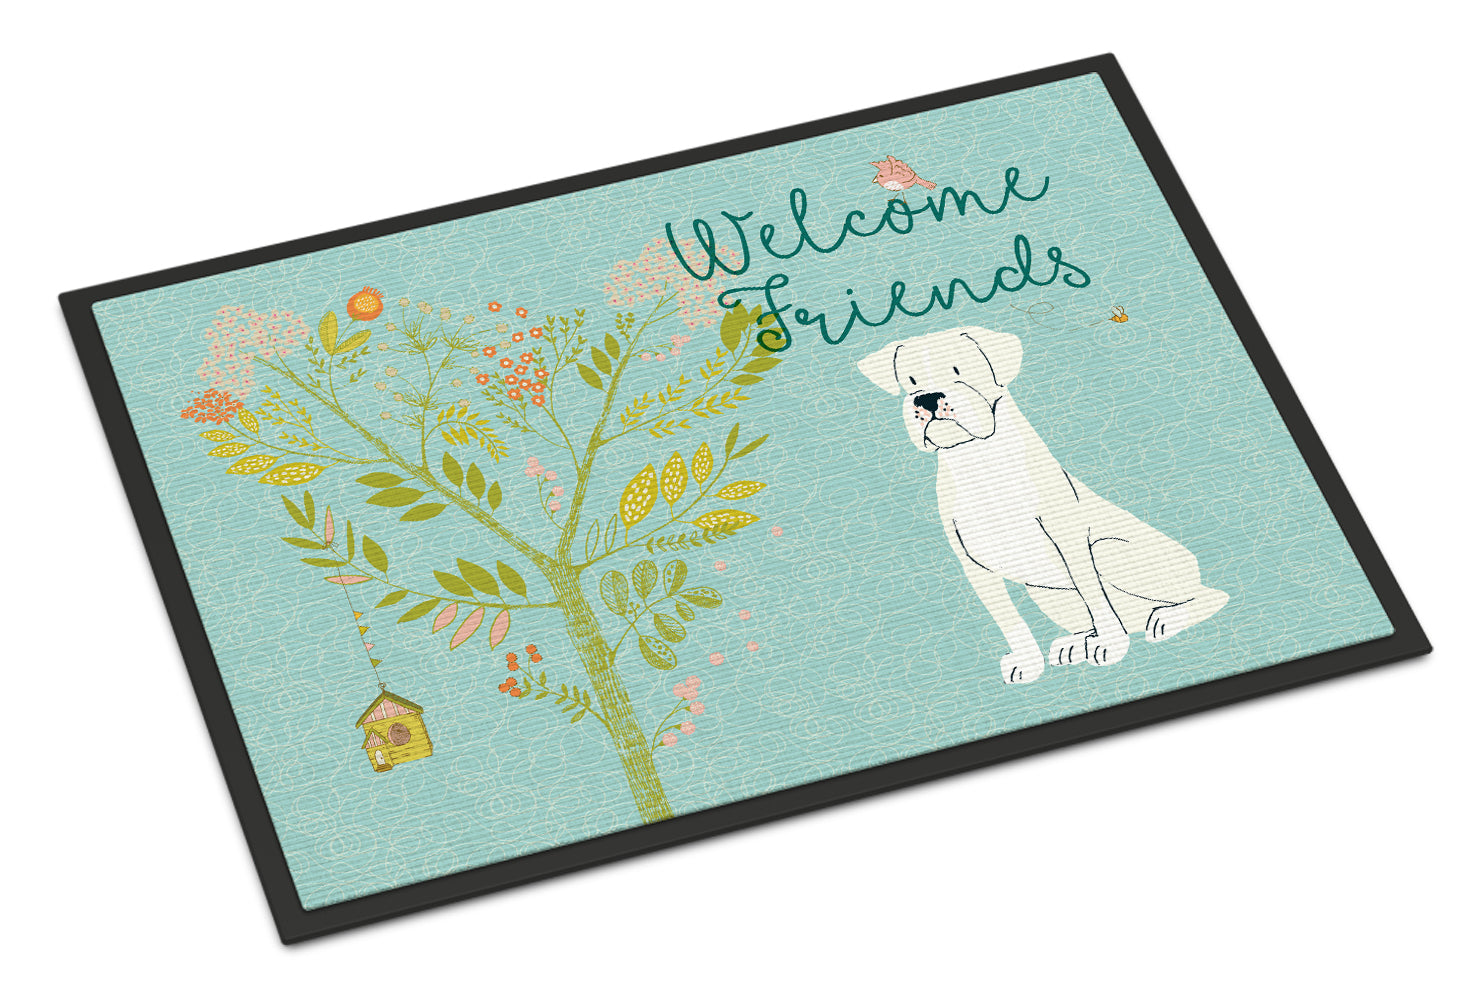 Welcome Friends White Boxer Indoor or Outdoor Mat 18x27 BB7580MAT - the-store.com